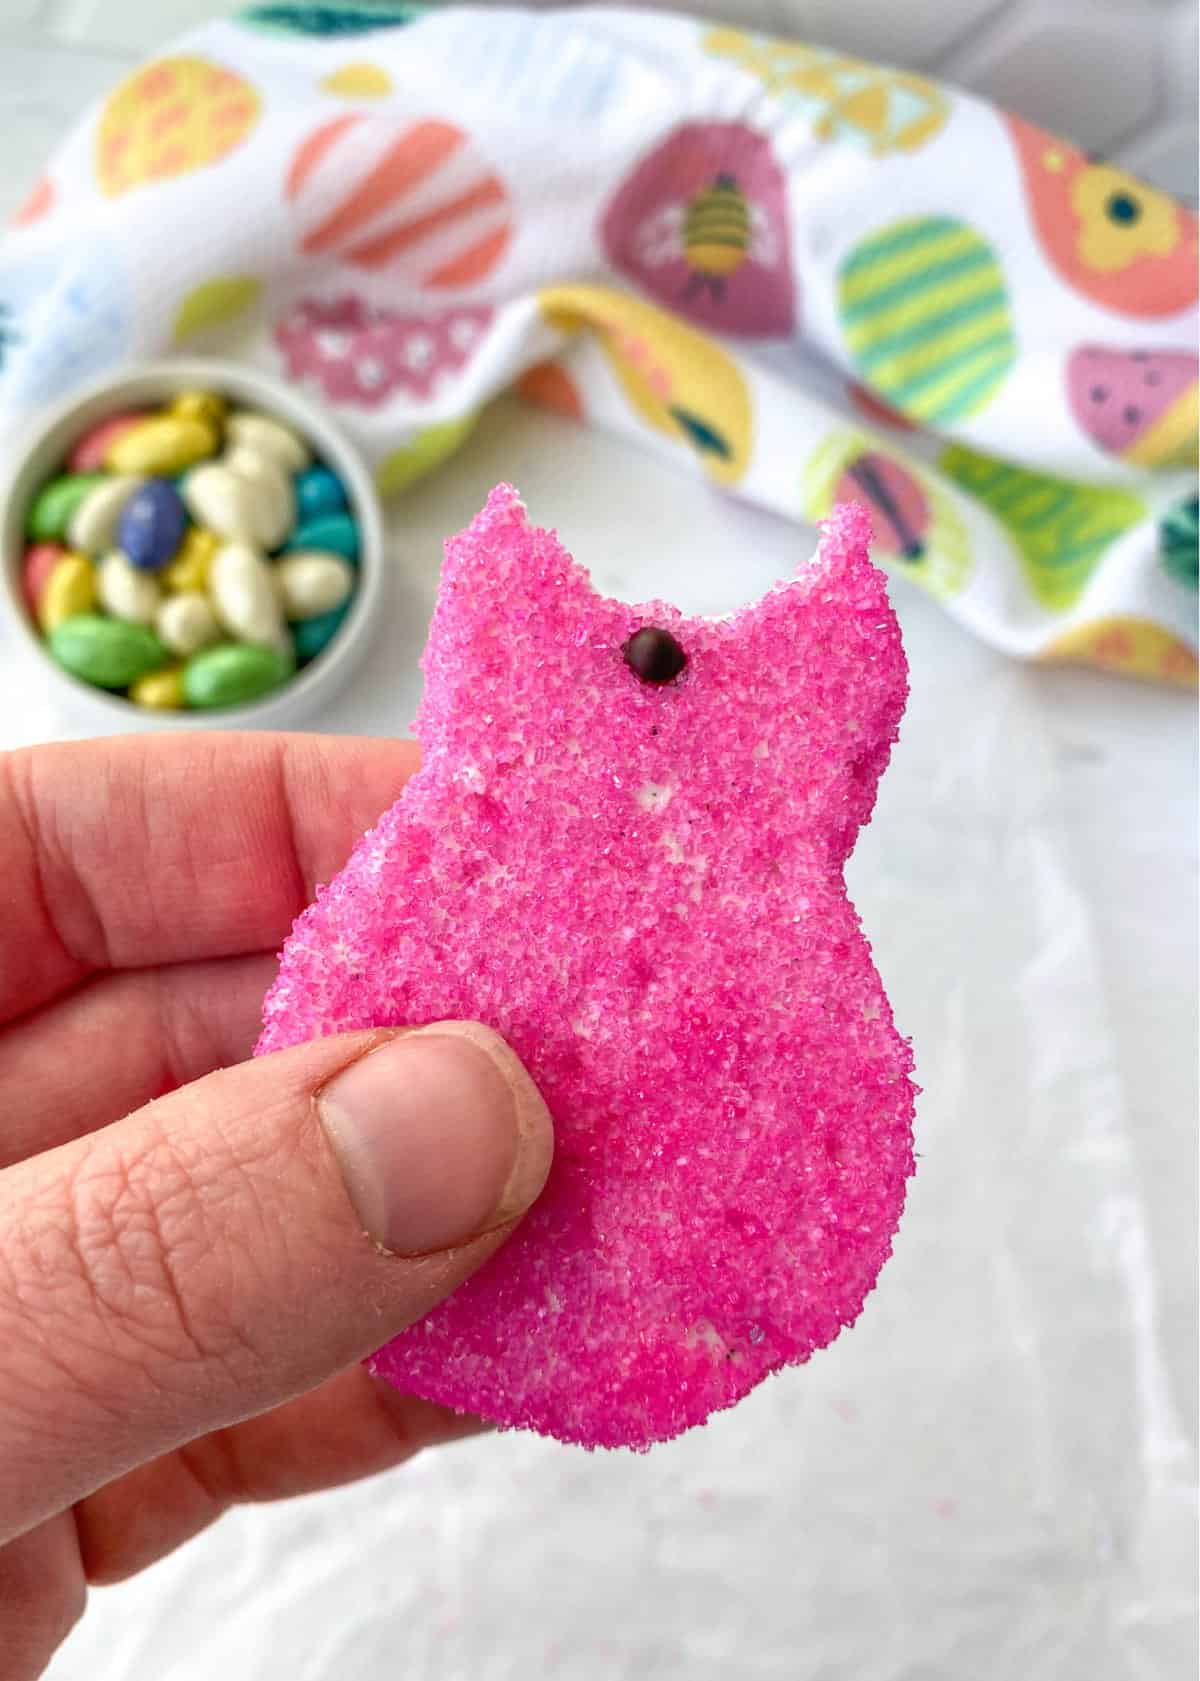 Closeup of a pink Homemade Peep with a bite out of it.